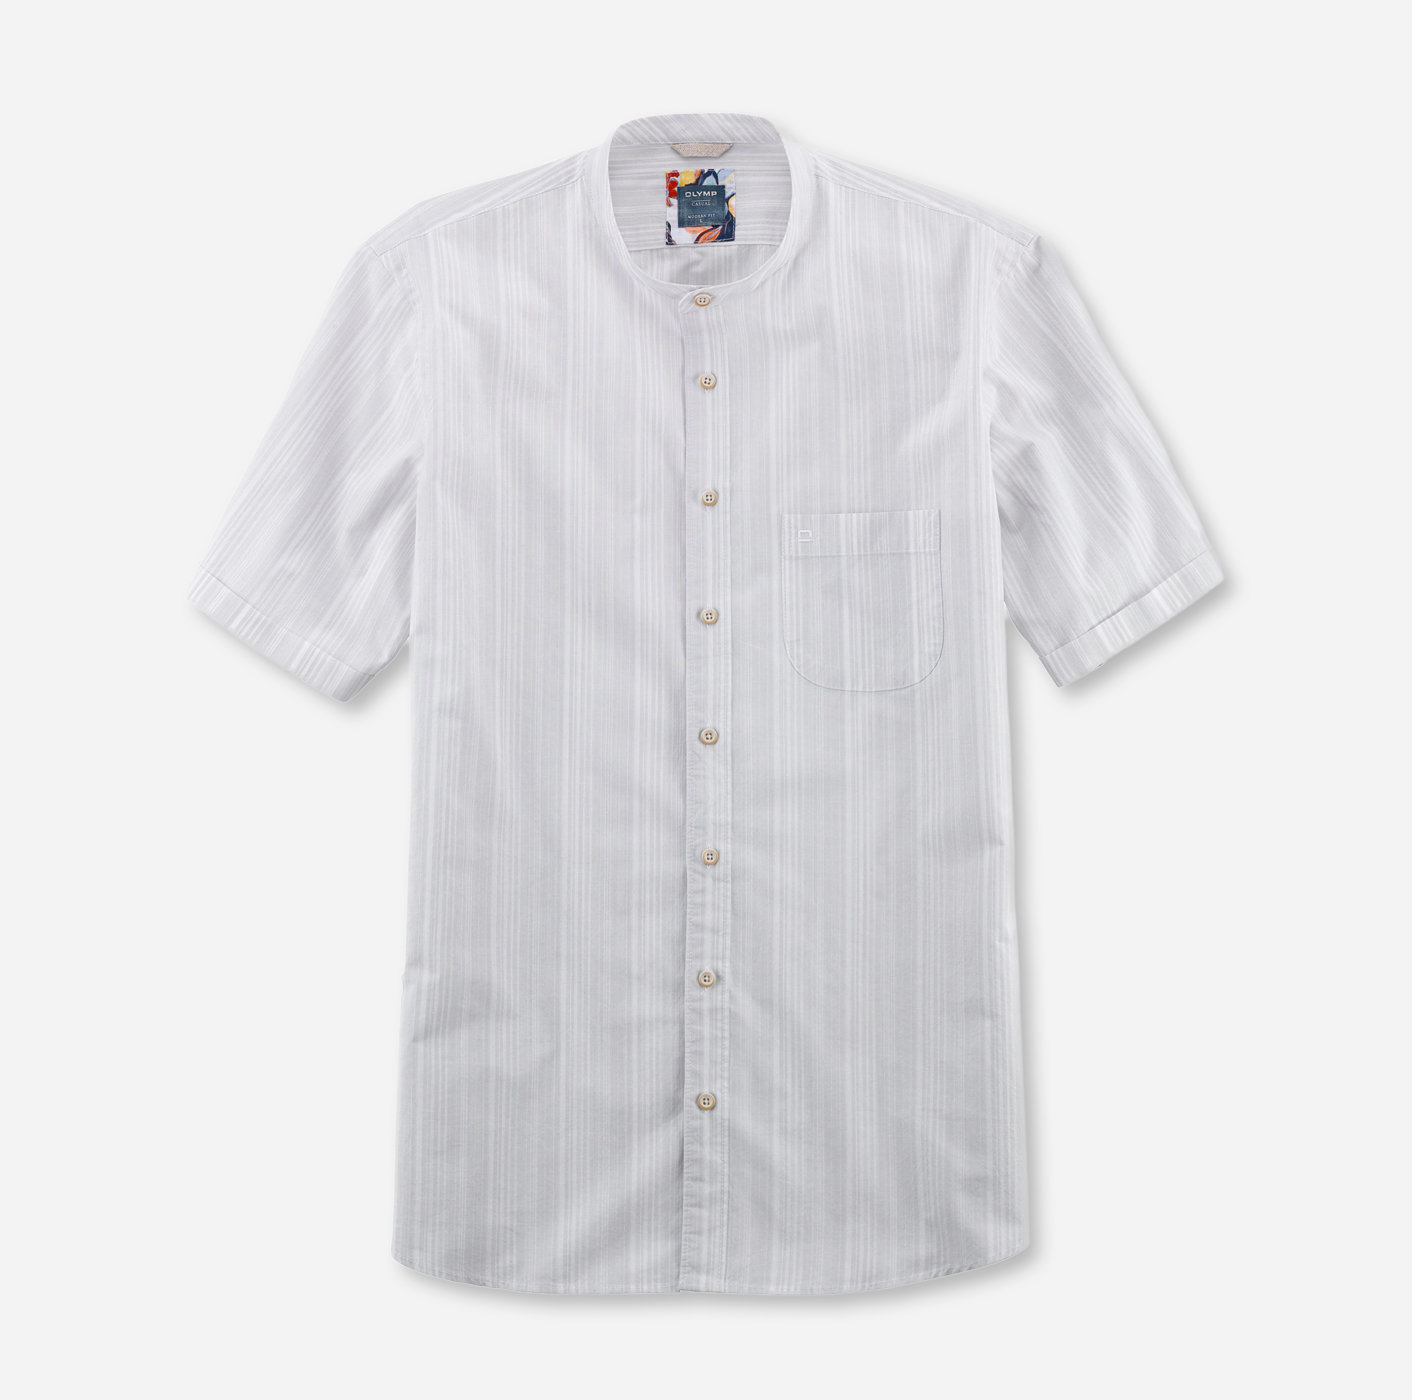 OLYMP Casual, modern fit, Casual shirt, Stand-up collar, White